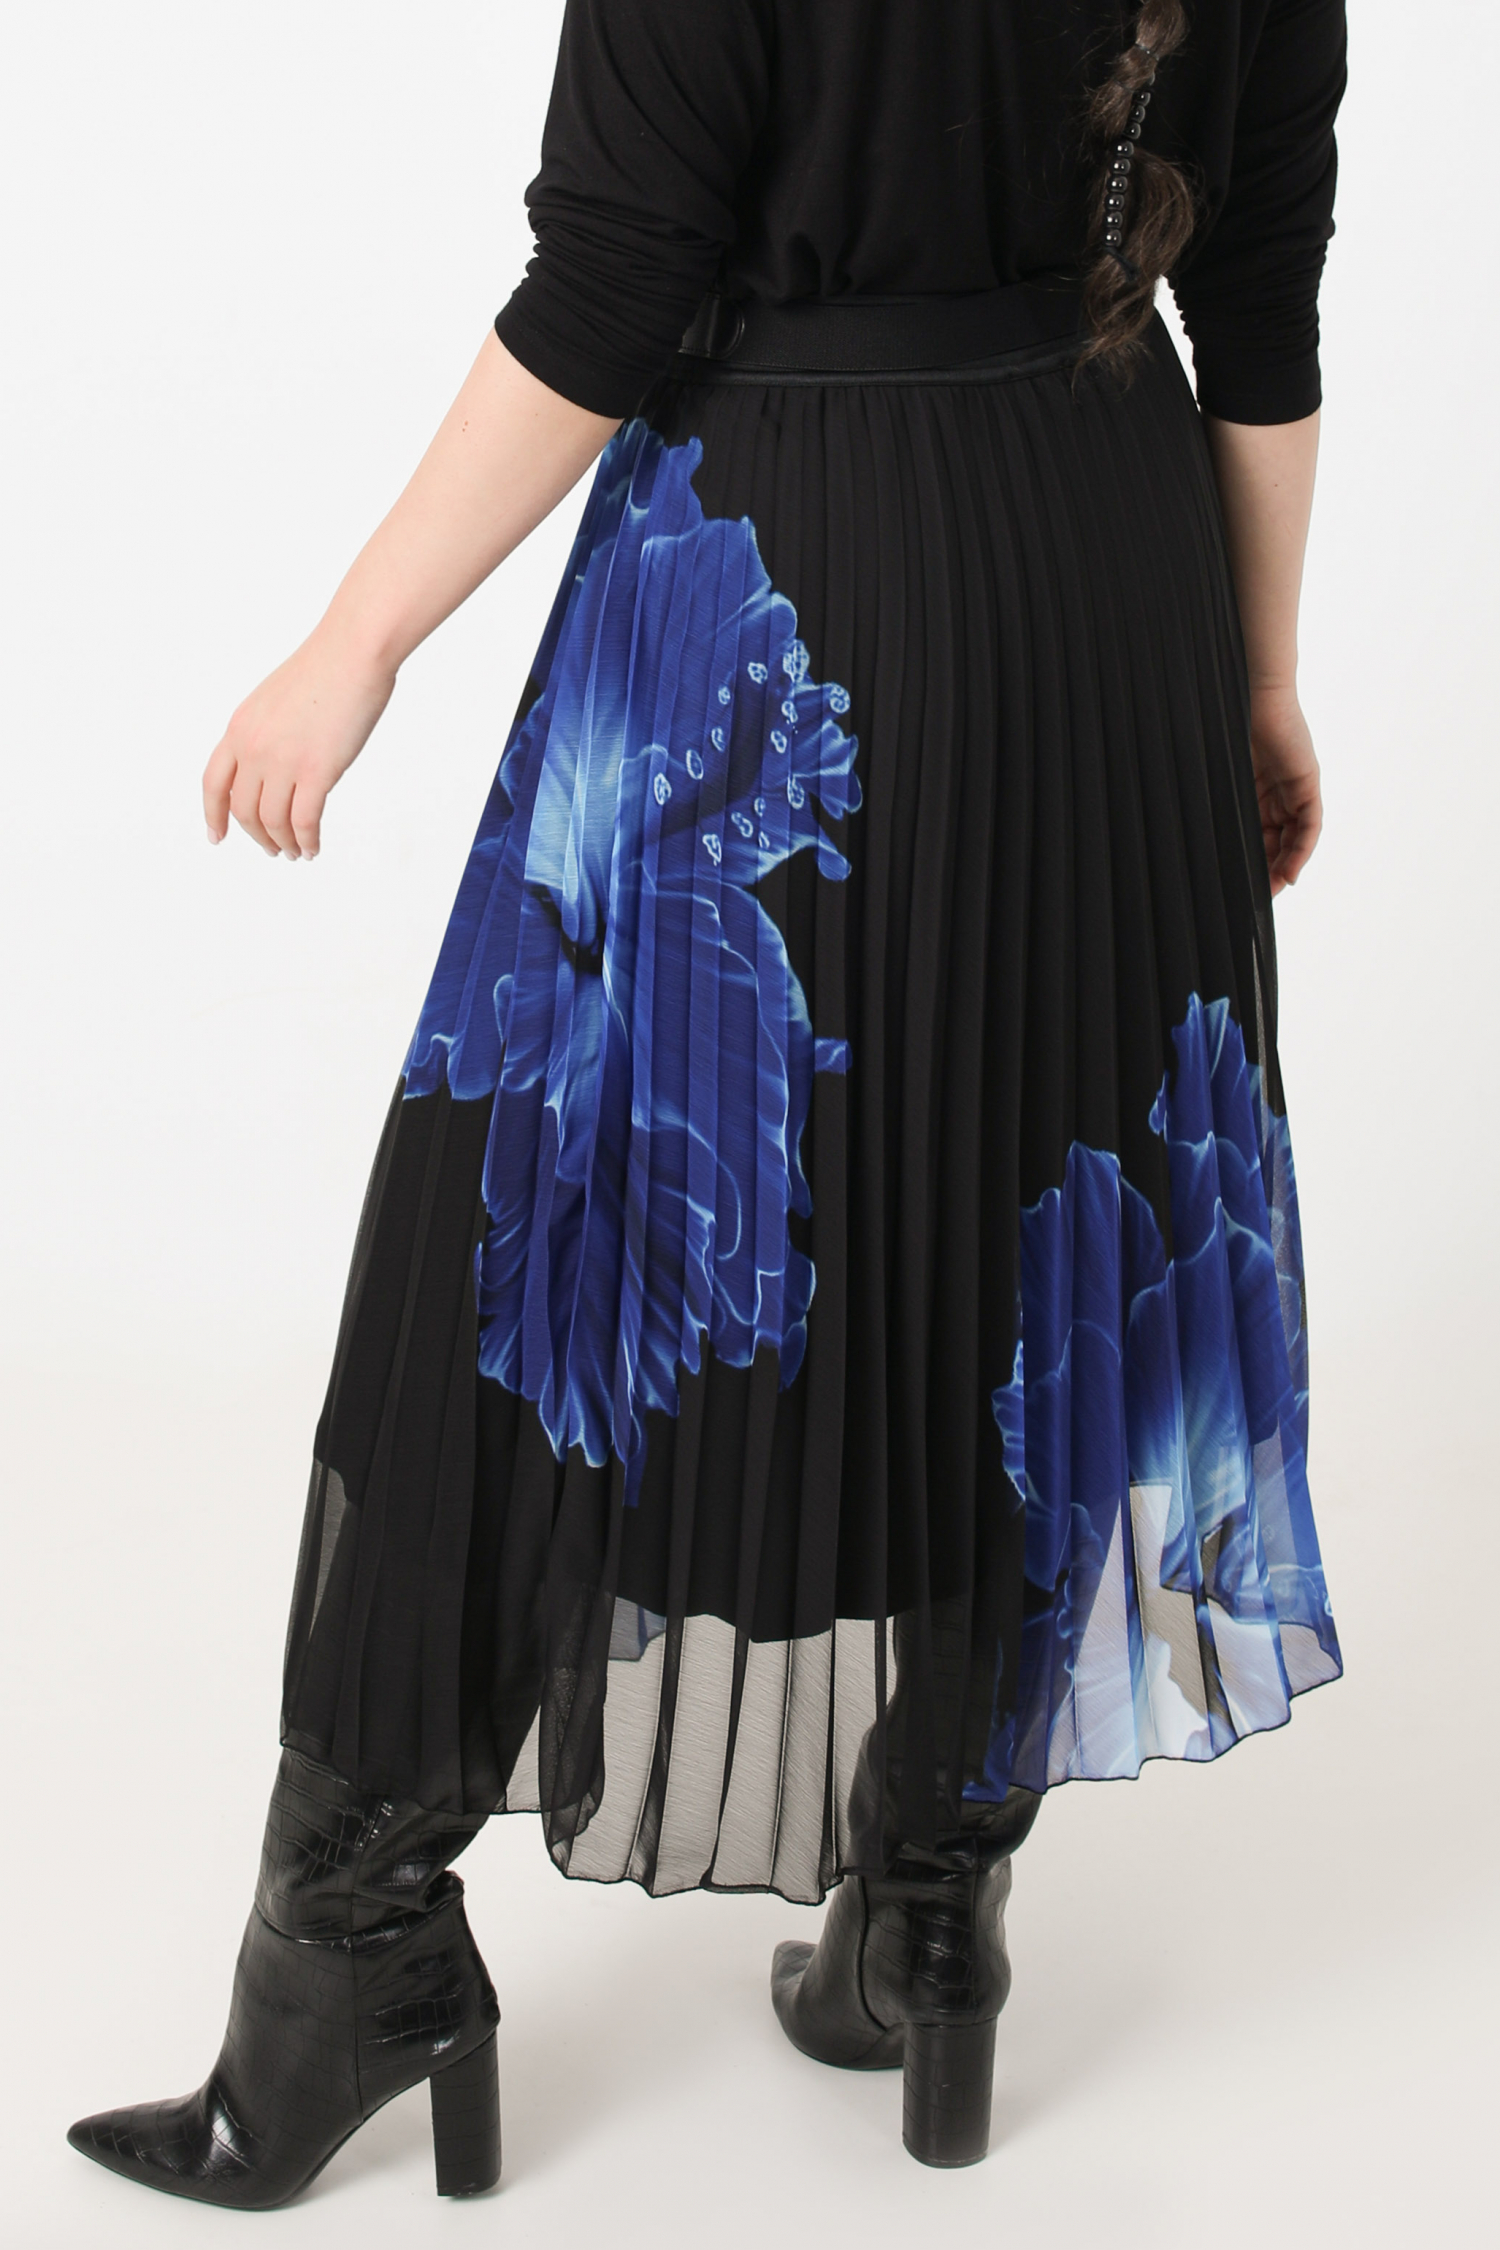 Pleated skirt with flower print (shipping March 10/15)